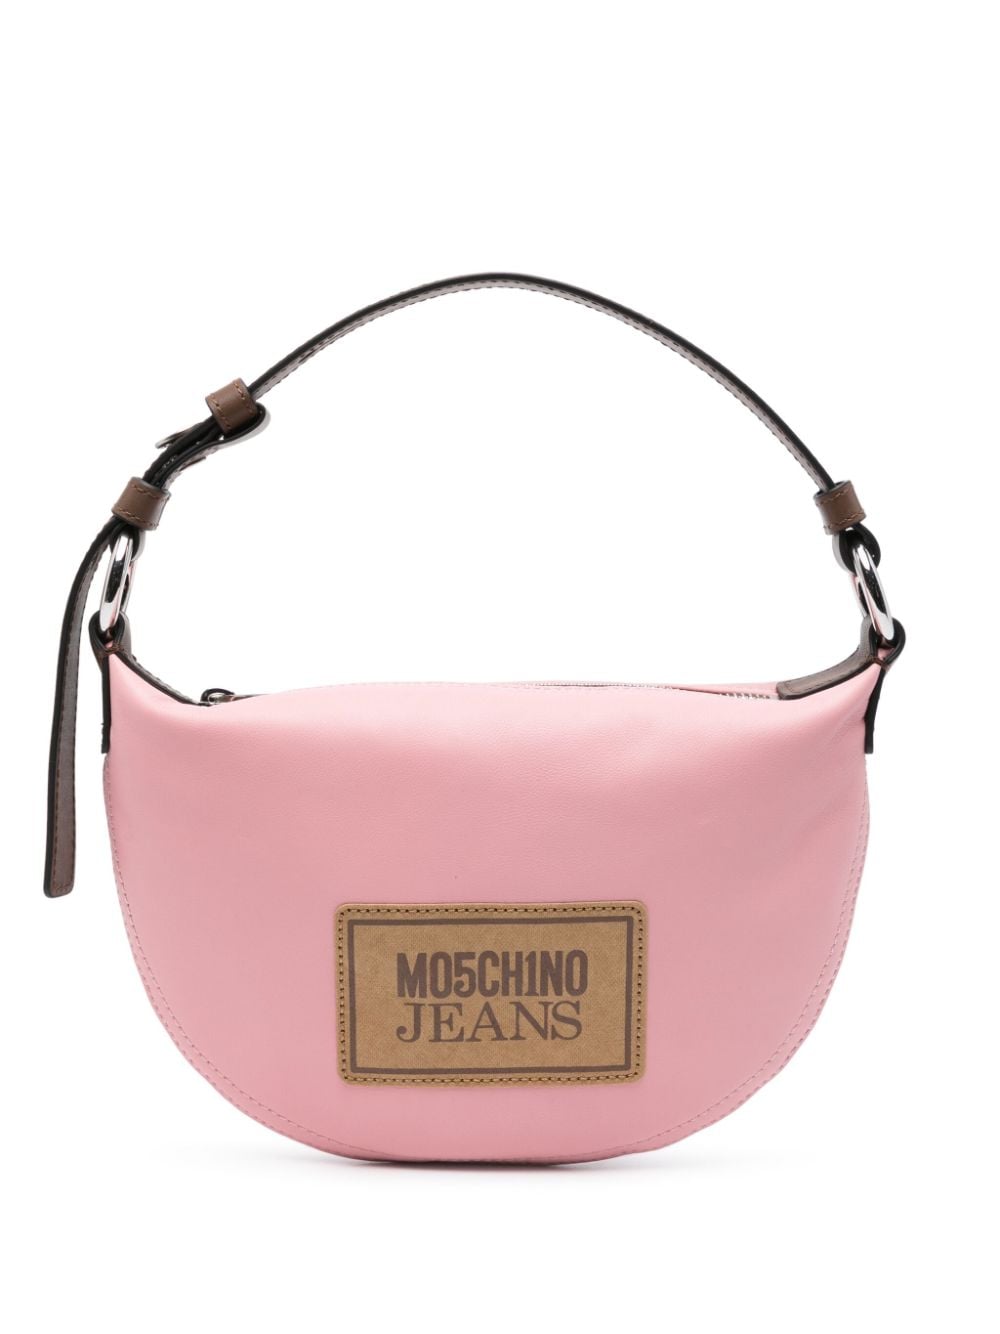 MOSCHINO JEANS logo-patch leather shoulder bag - Pink von MOSCHINO JEANS